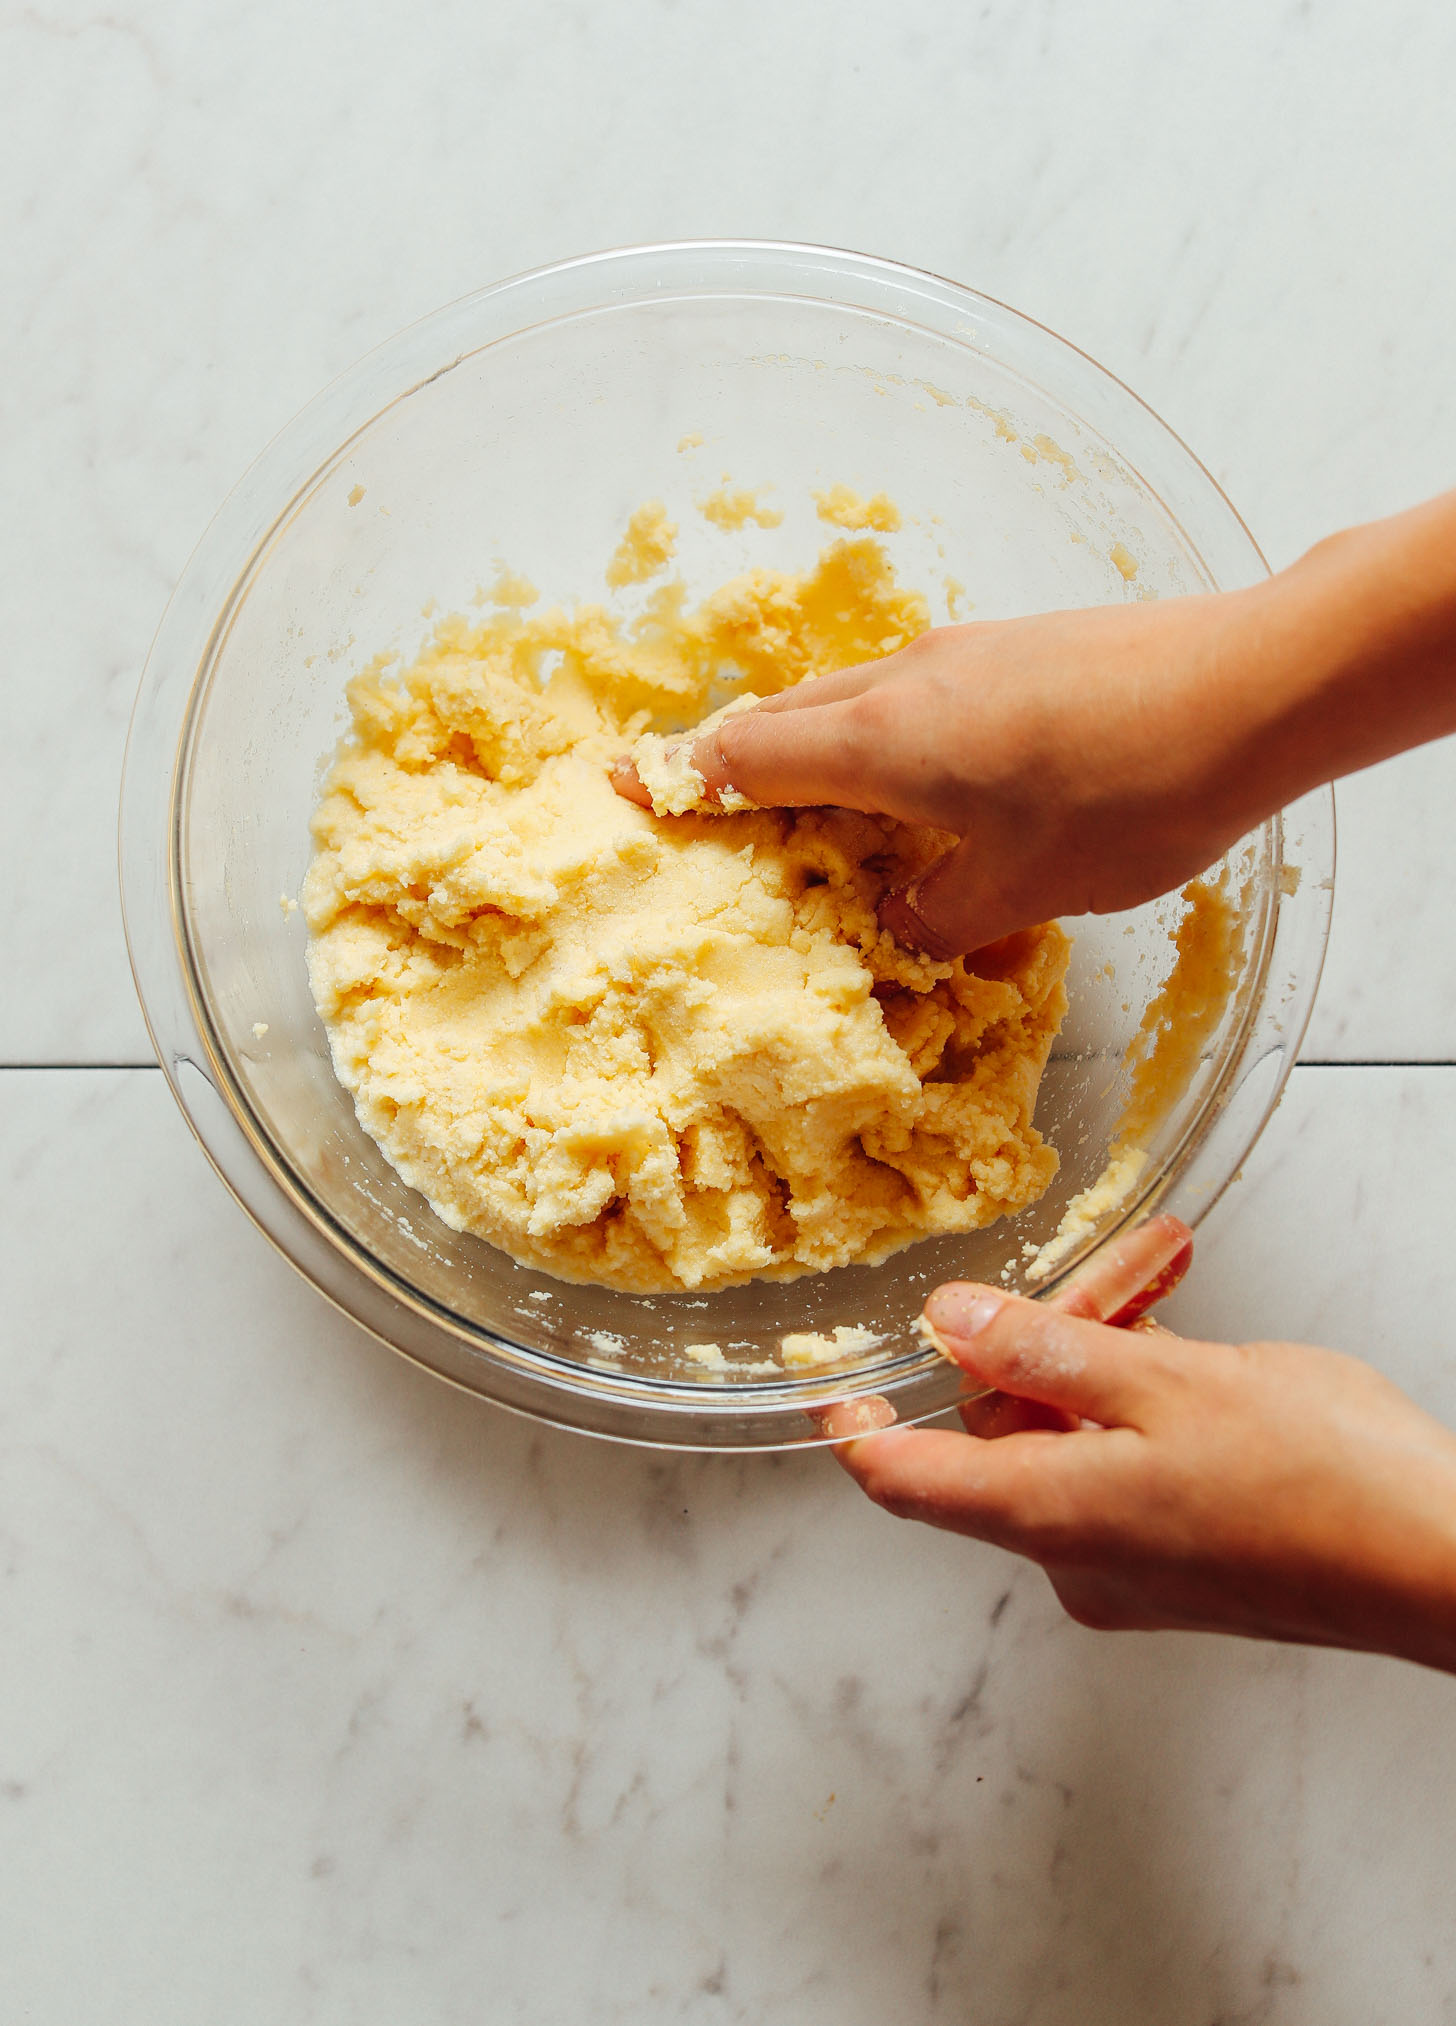 Mixing arepa dough by hand in a mixing bowl